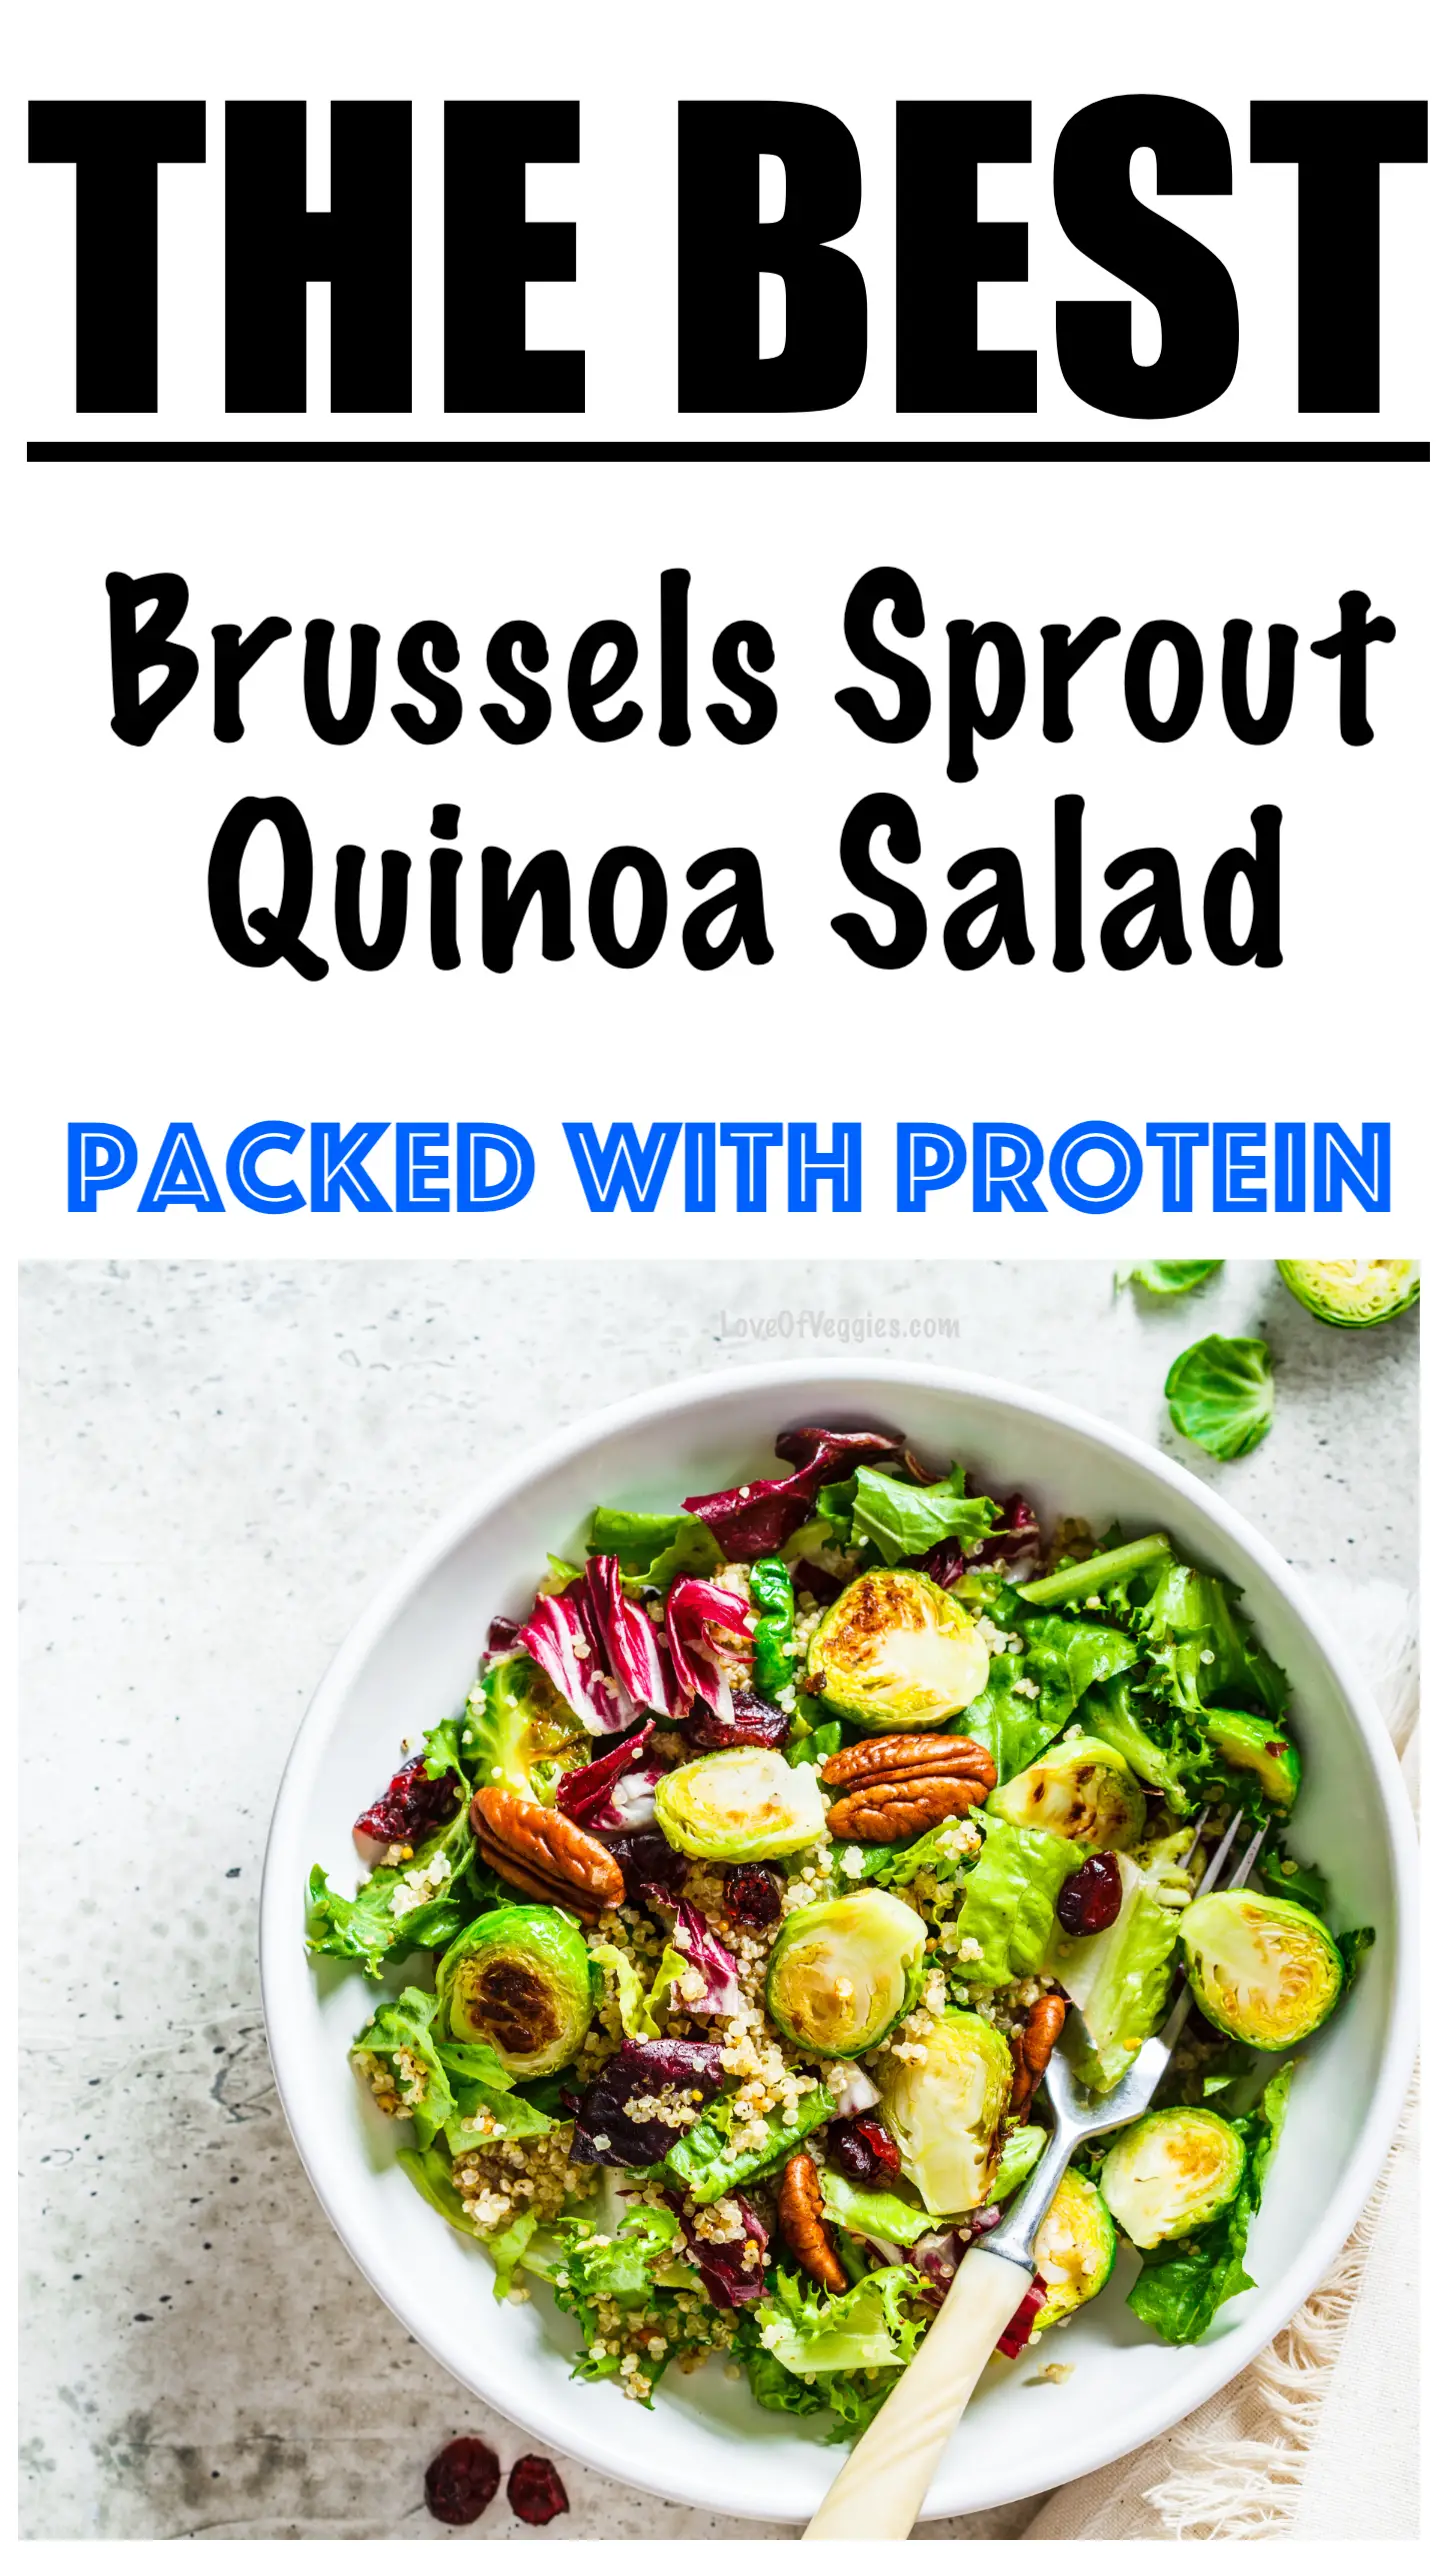 Roasted Brussels Sprouts and Quinoa Salad Recipe